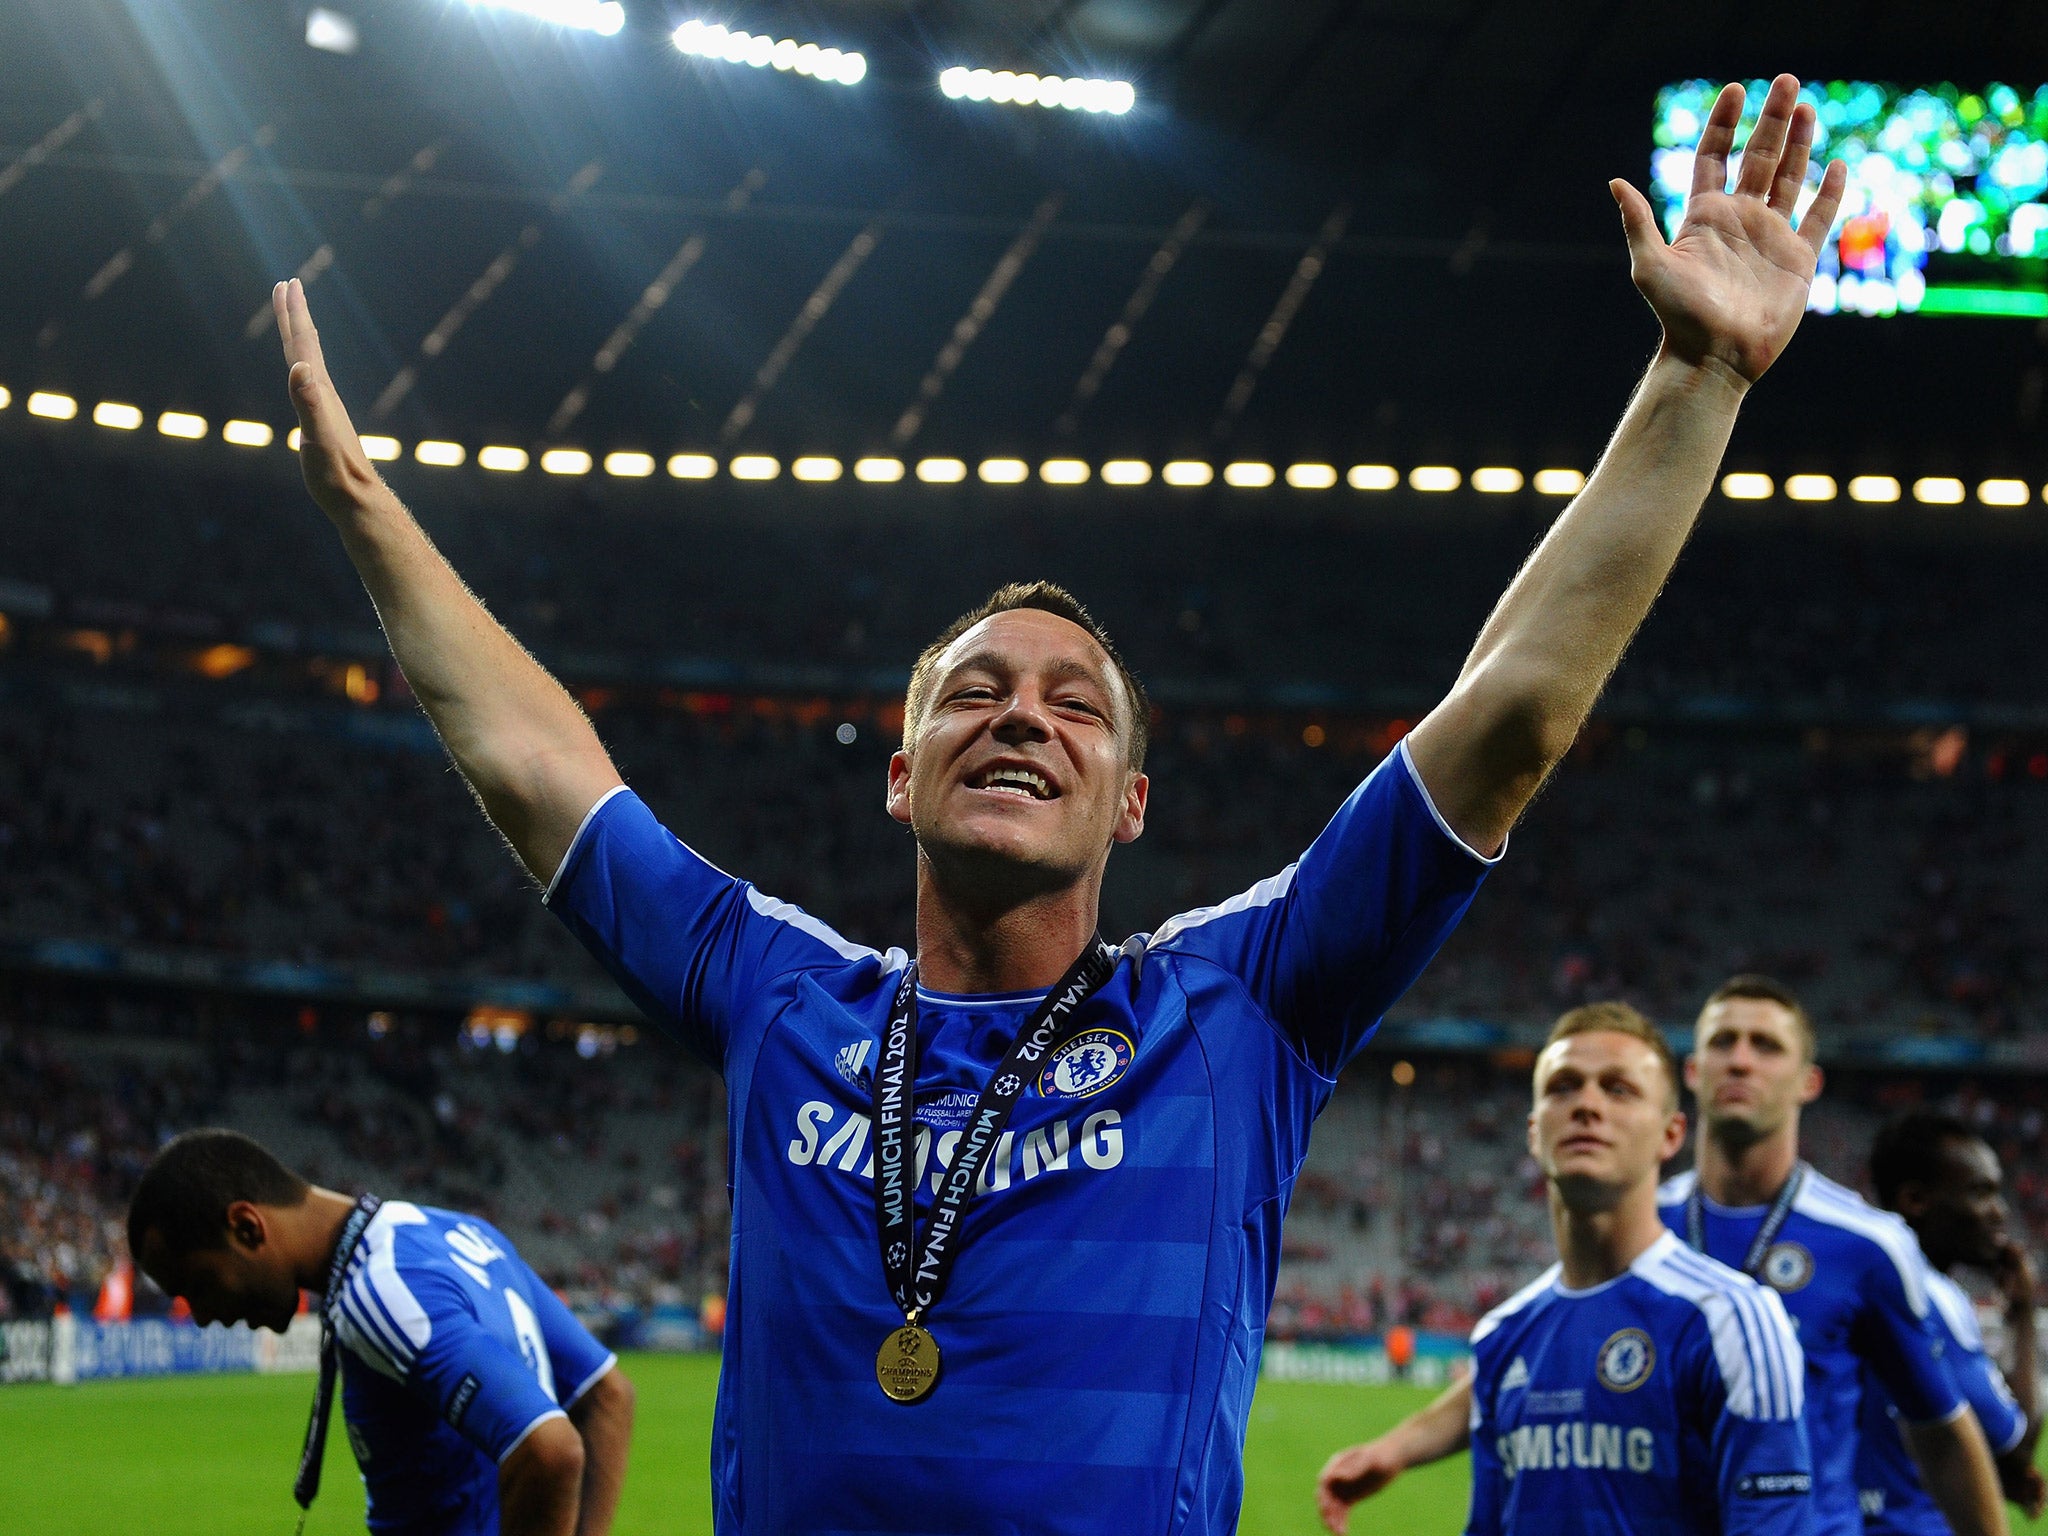 John Terry appeared in a full Chelsea kit after the 2012 Champions League final